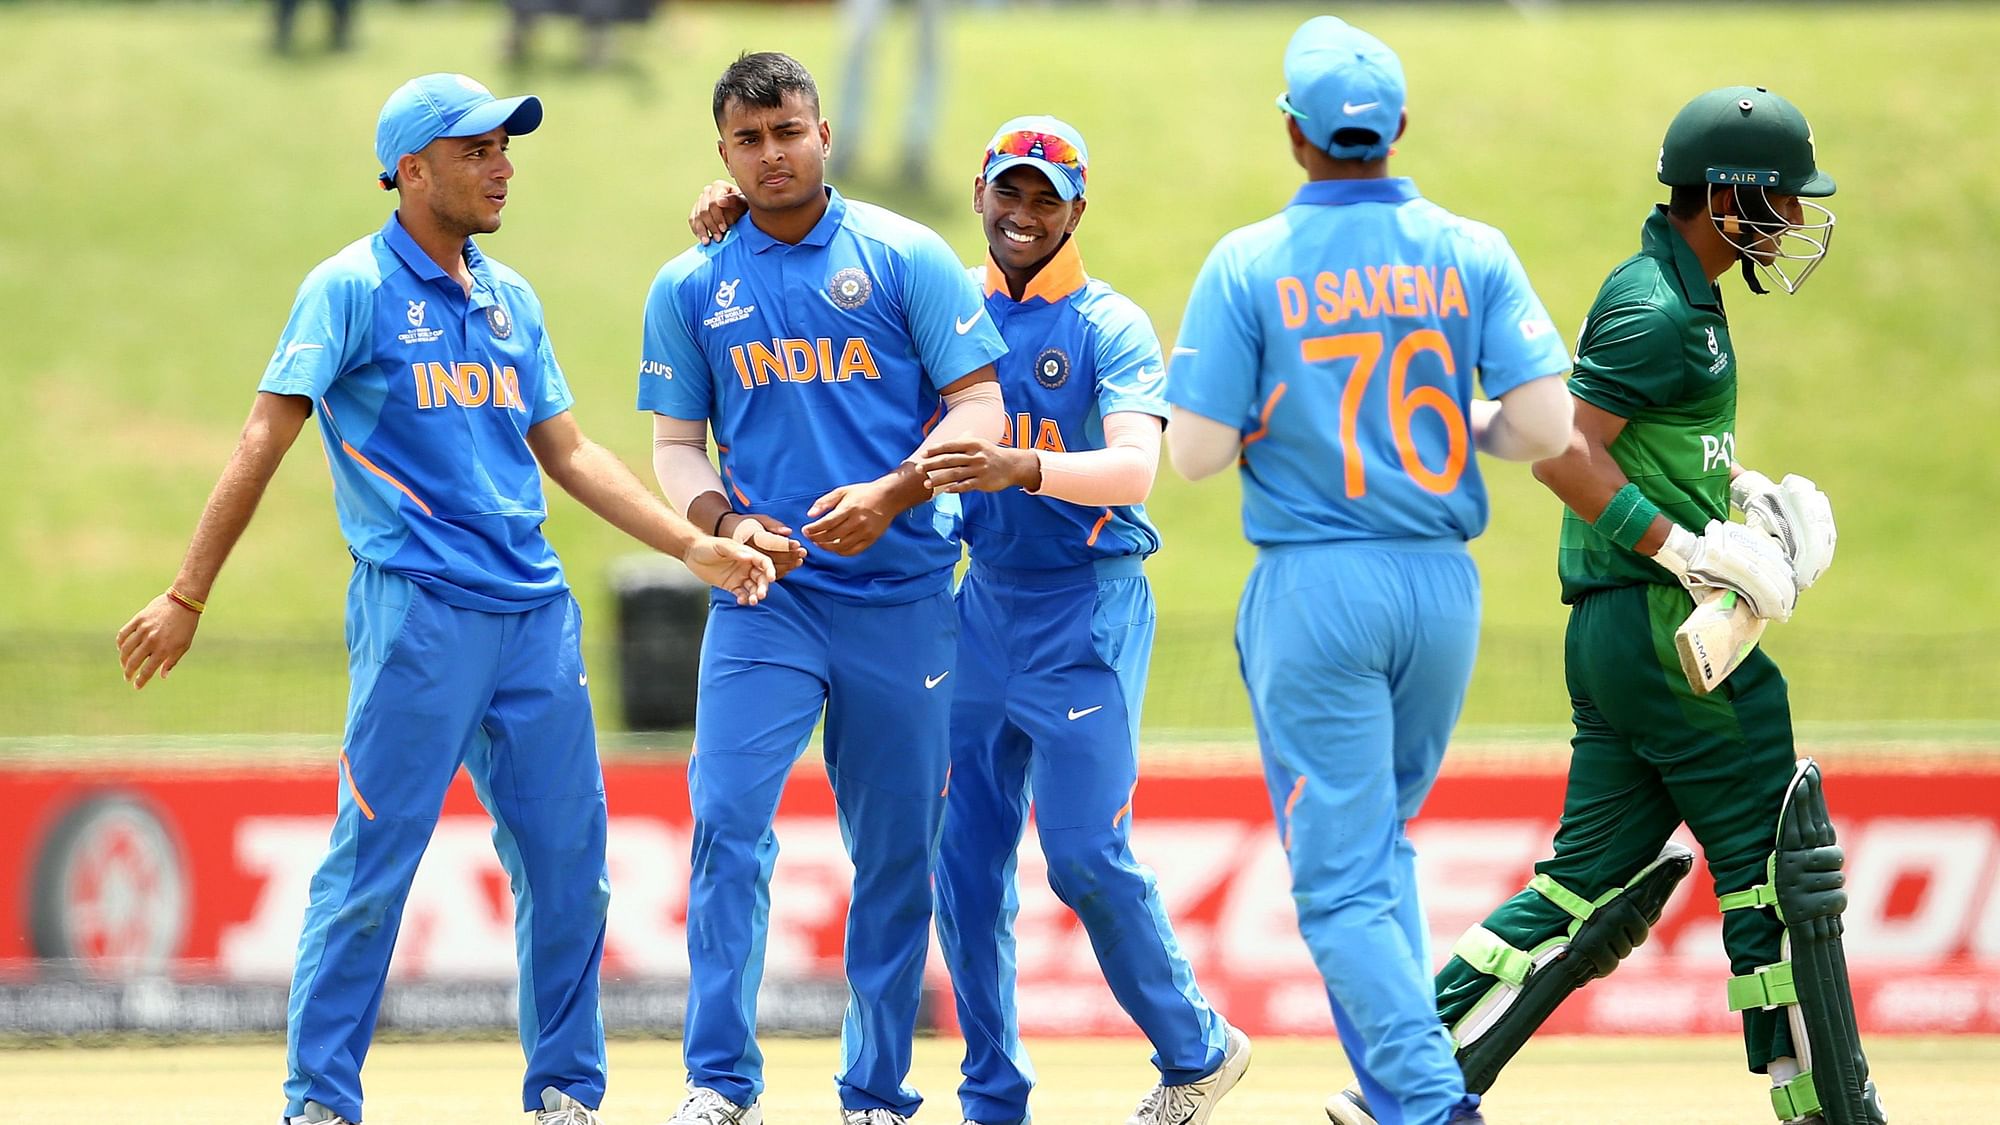 Defending champions India walloped their arch-rivals by 10 wickets to enter their seventh ICC U-19 World Cup final on Tuesday, 4 February.